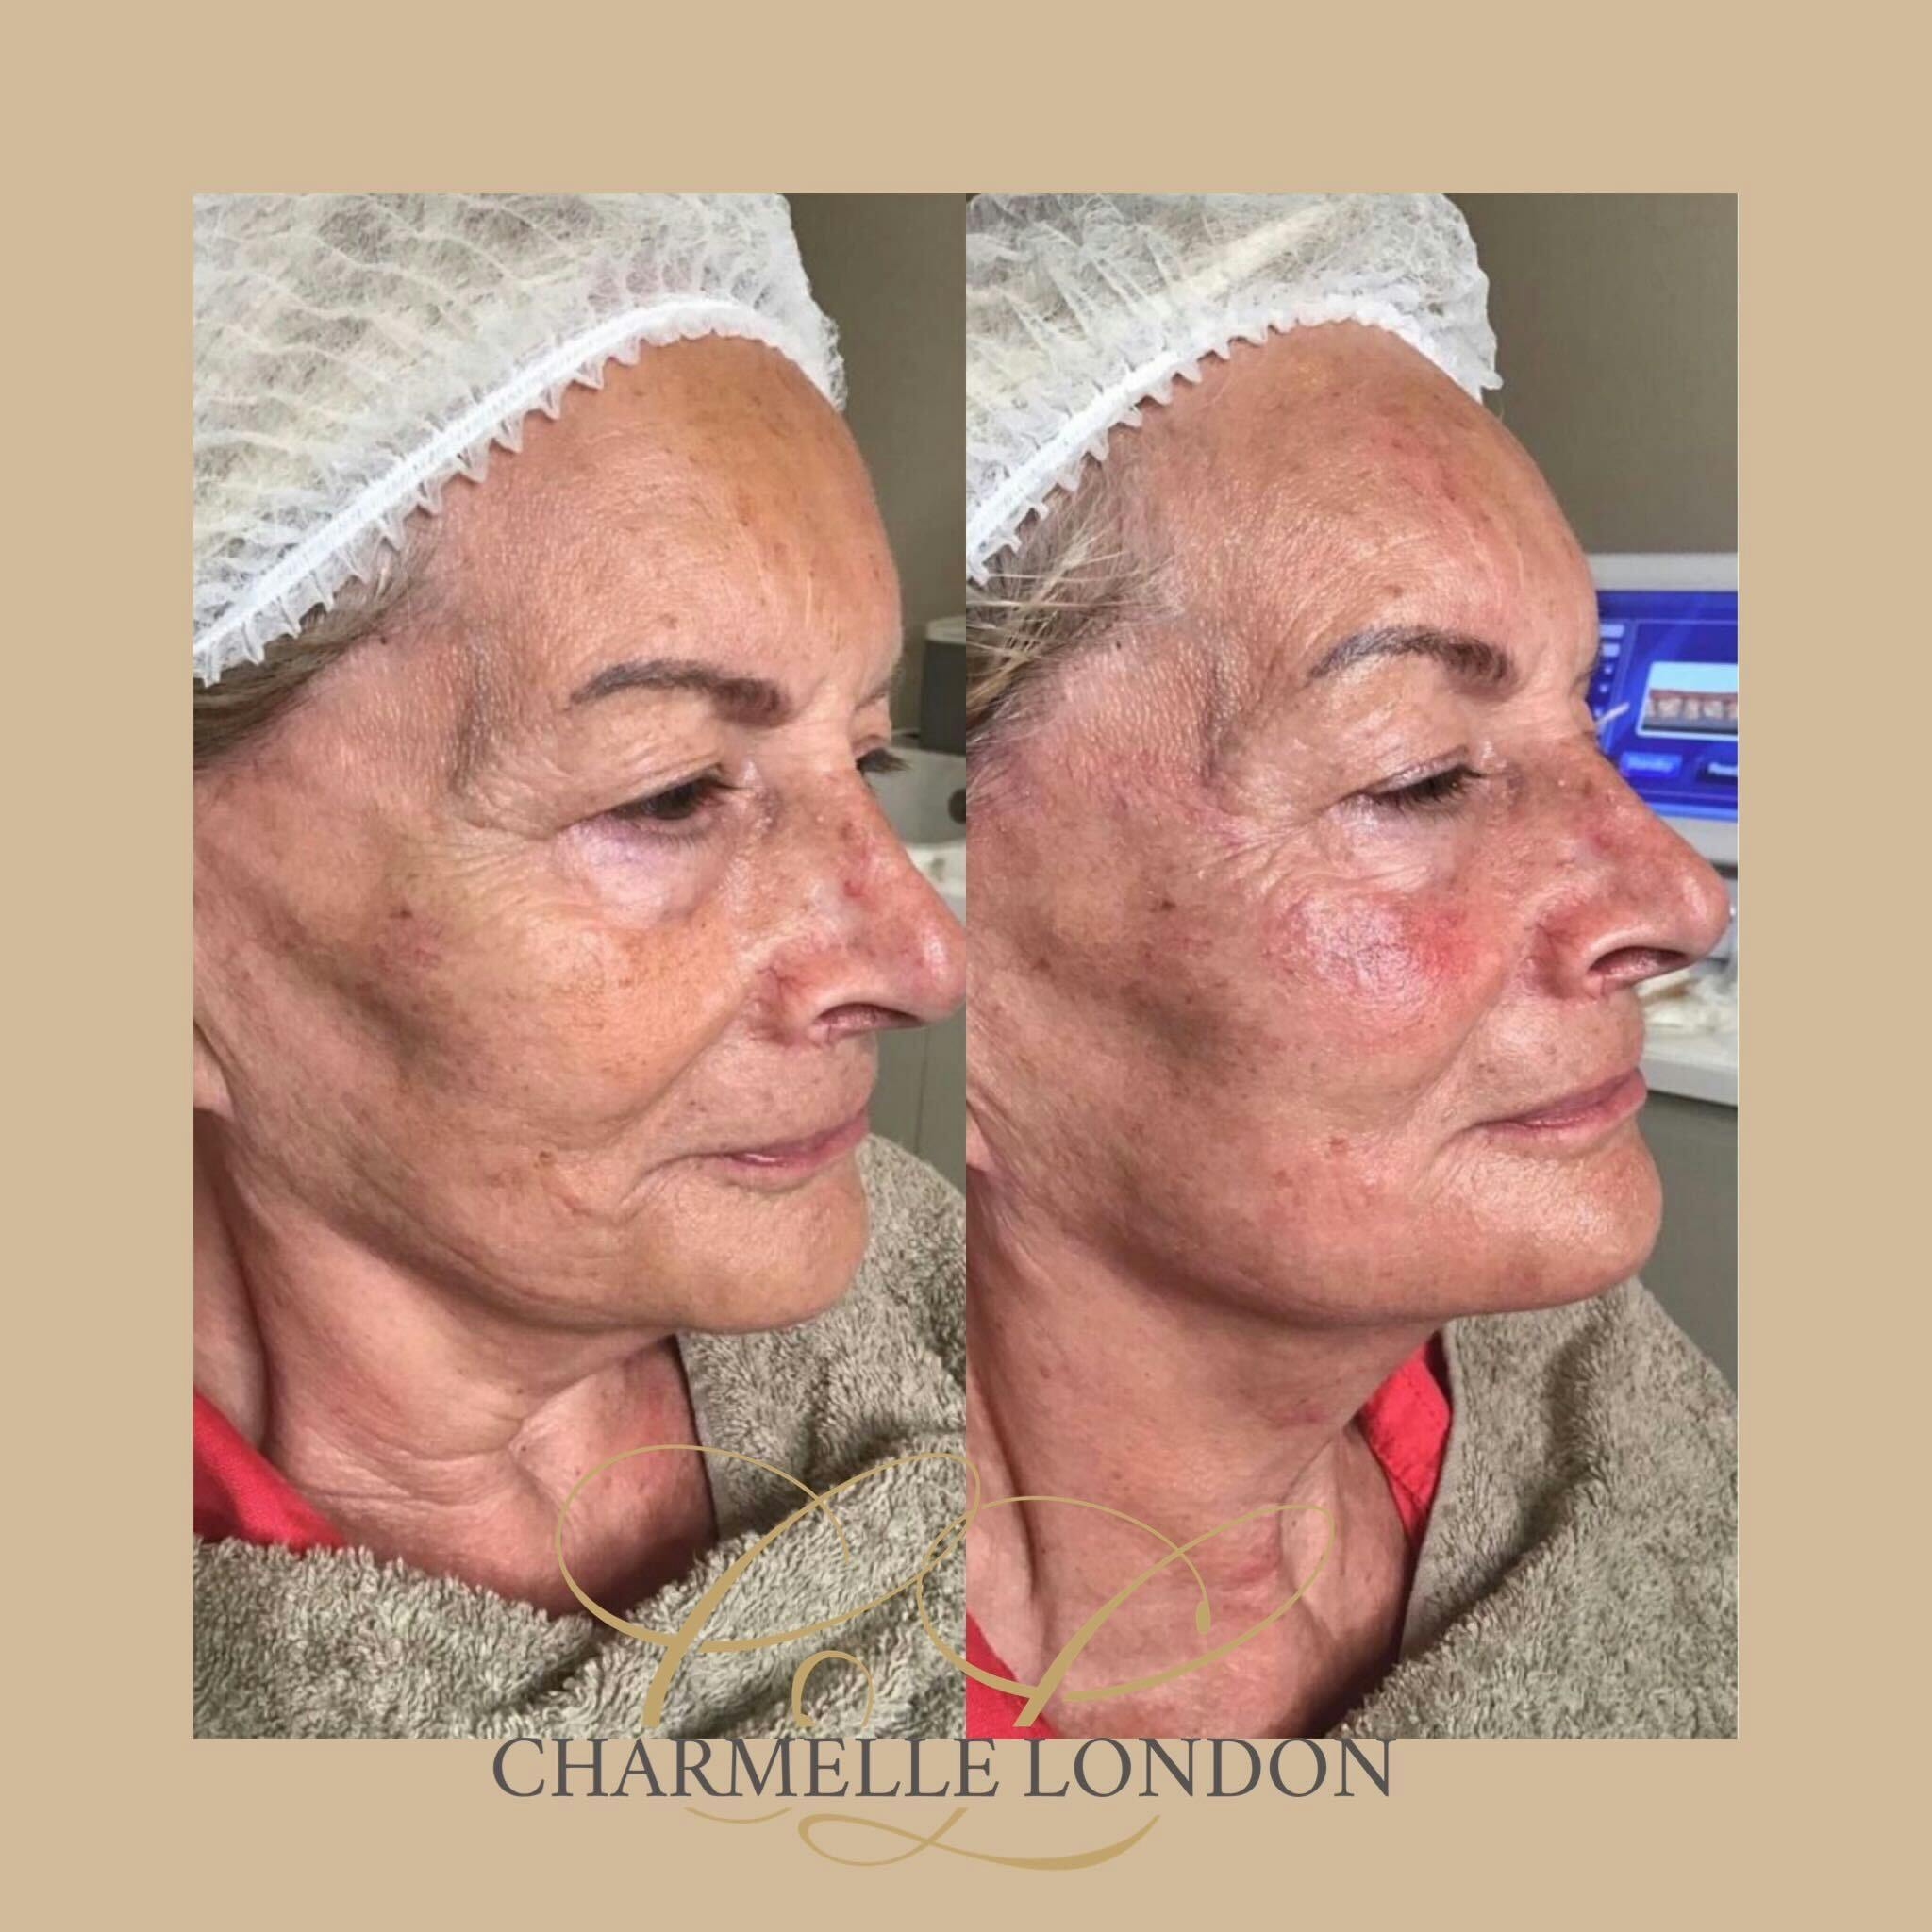 Non-surgical Skin Lifting has become one of the most sought after treatments, and HIFU is the latest to excel in this arena in just one single session!